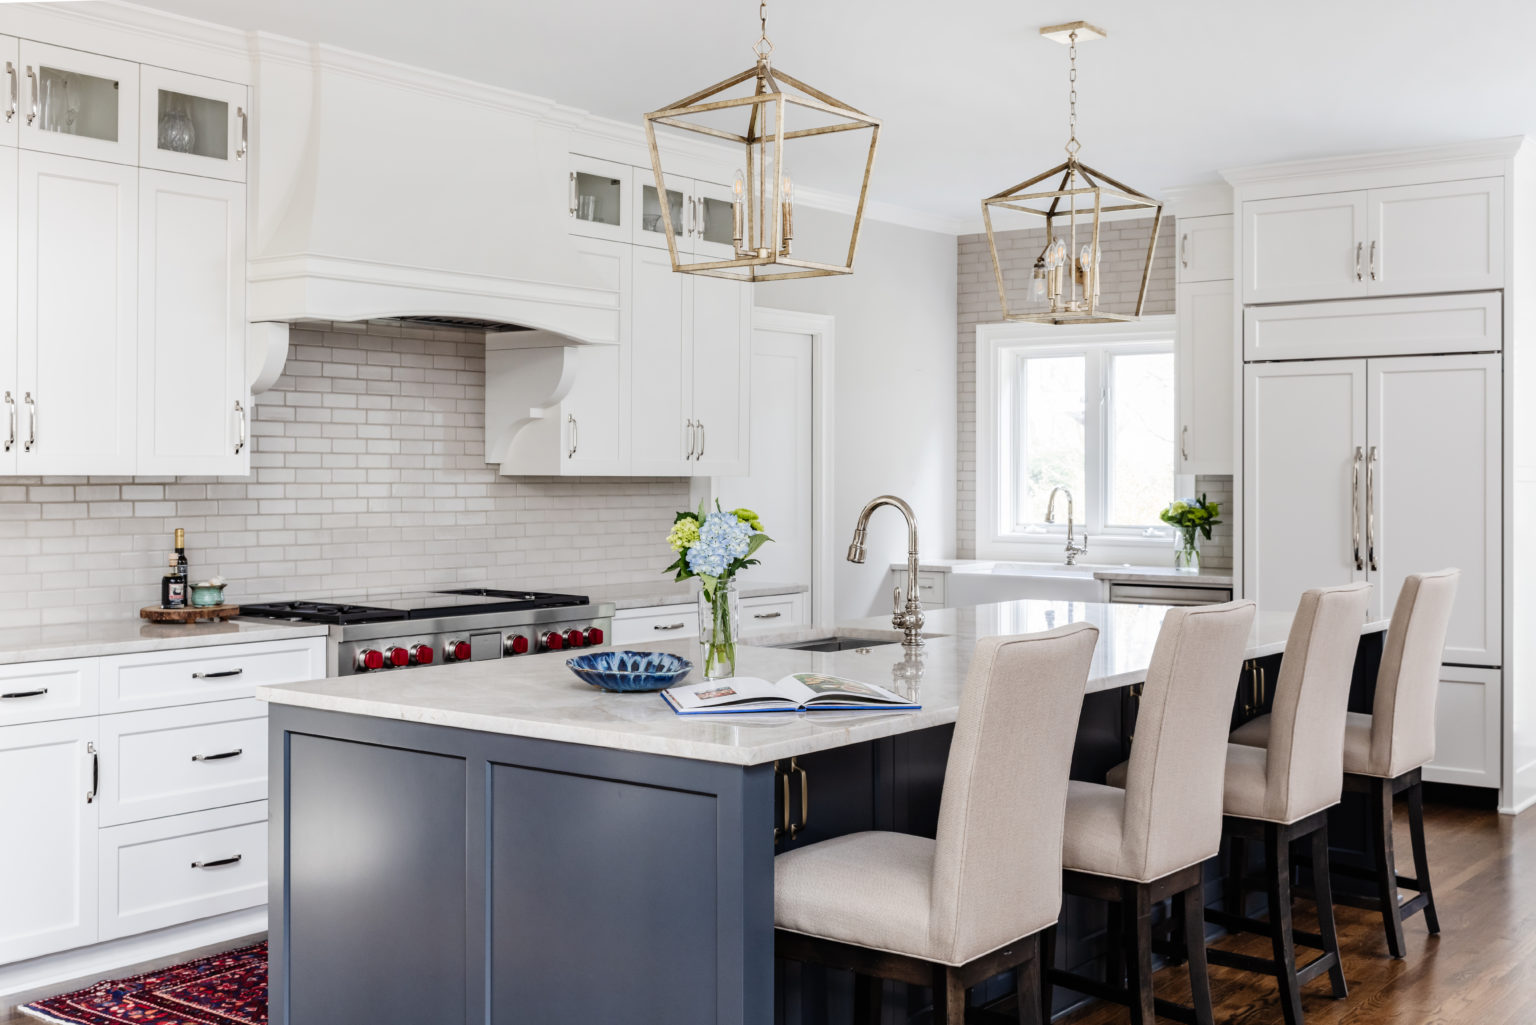 The Best Kitchen Remodeling Contractors in Charlotte - Charlotte Architects